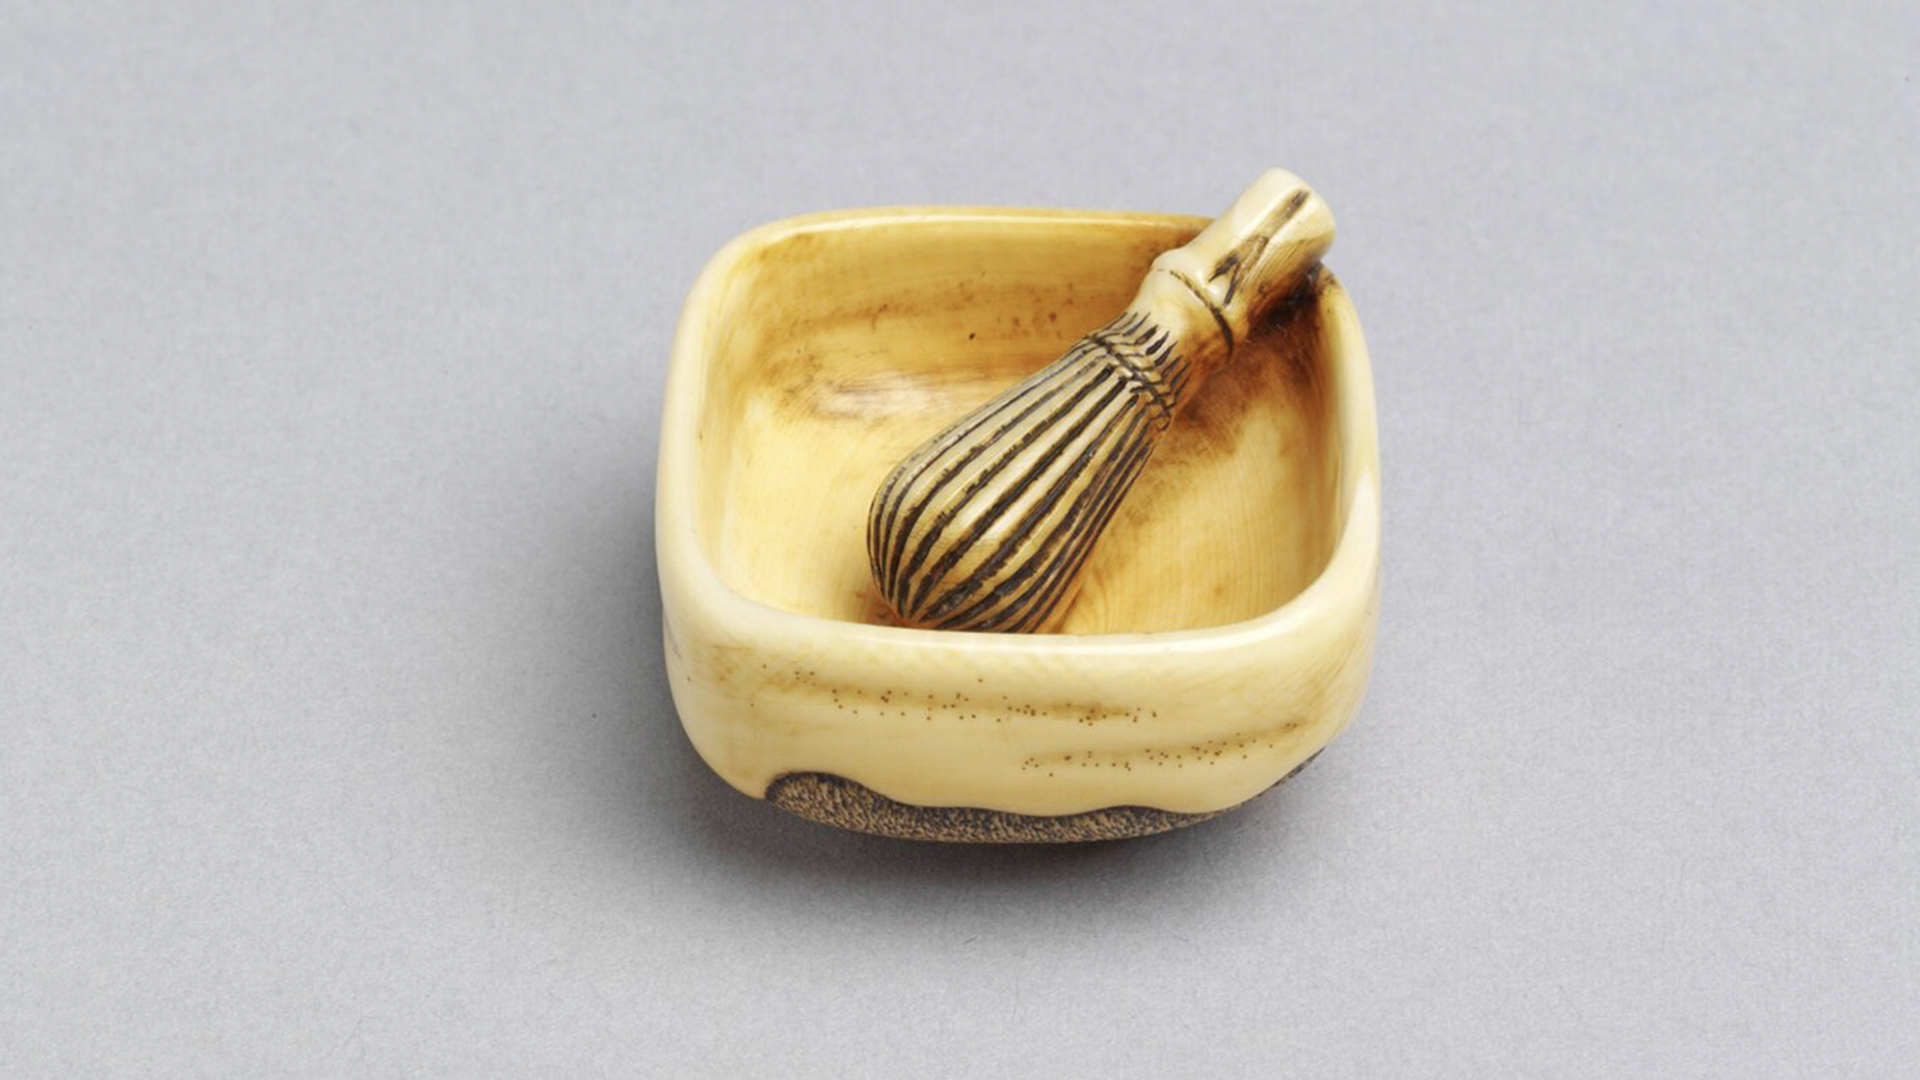 Miniature ivory carving of a tea bowl and whisk